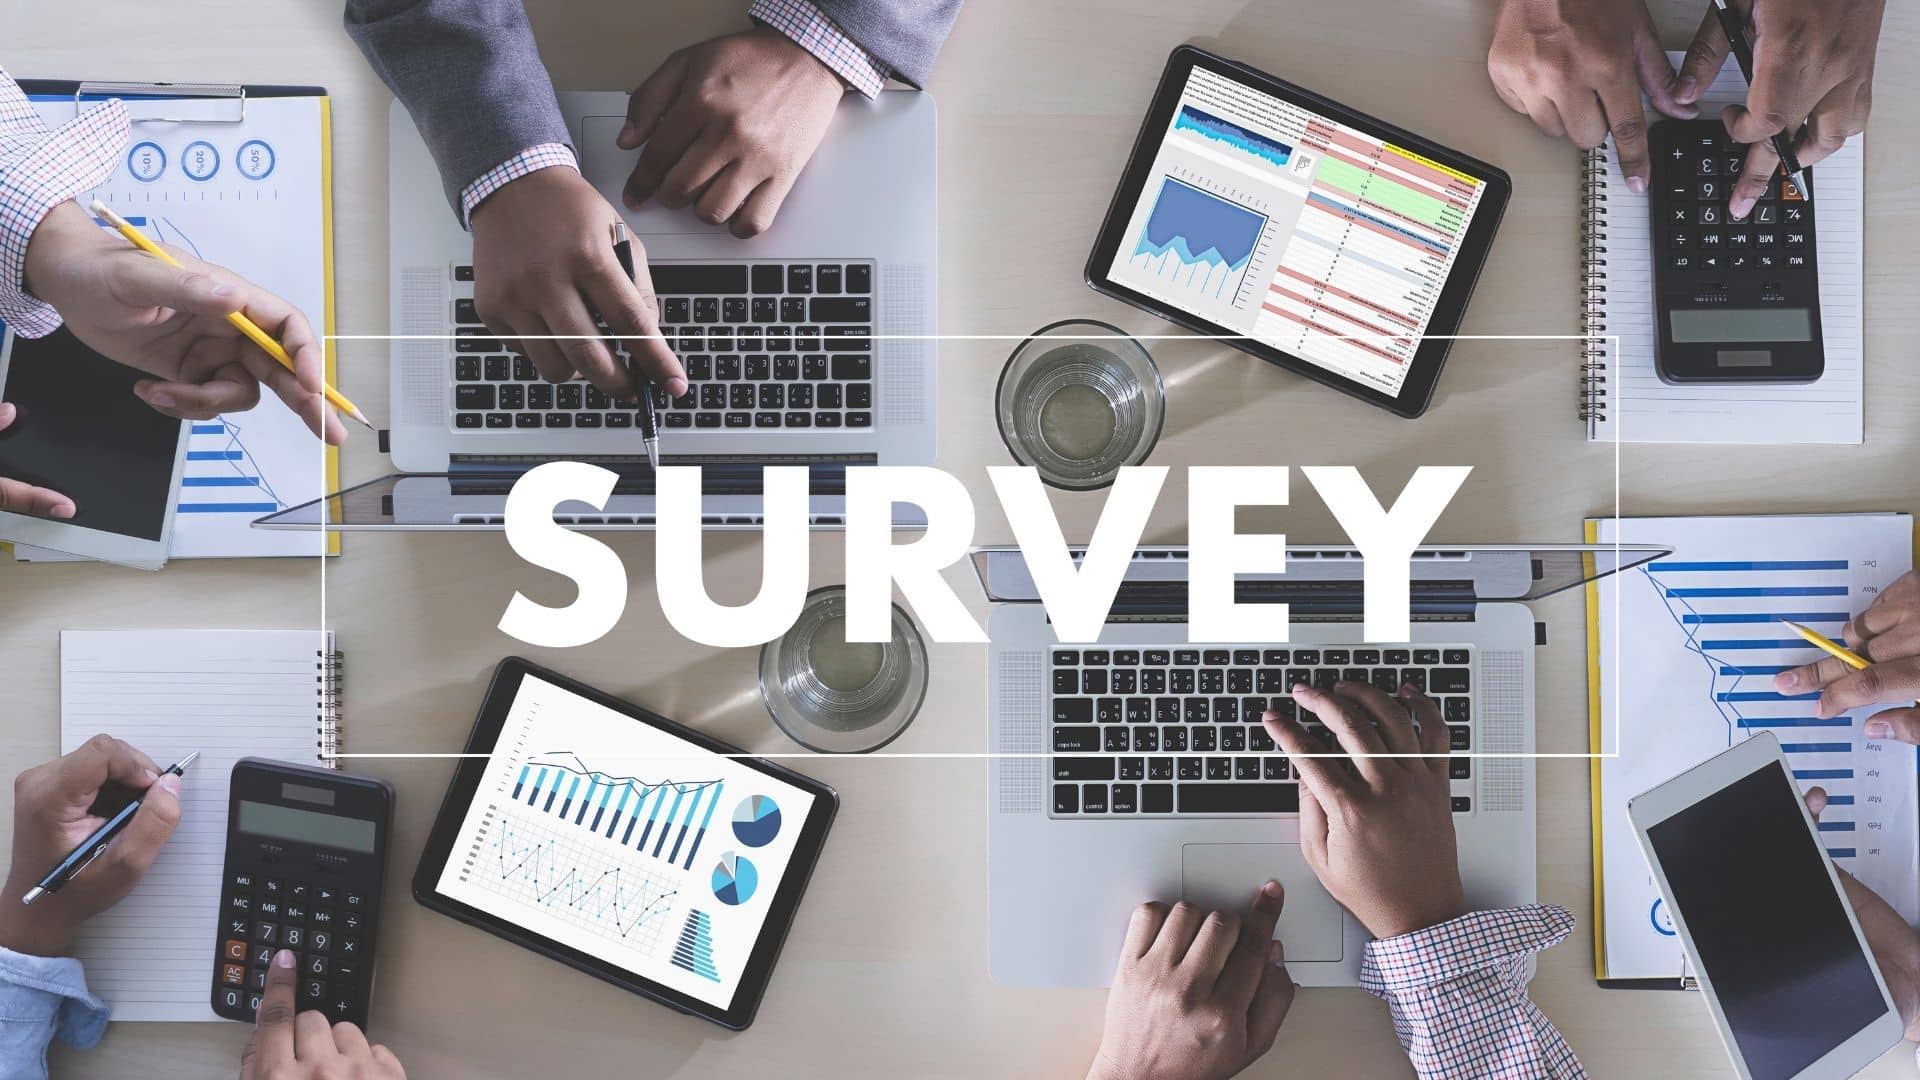 Panel Discussion and Results of the 2018 Annual Grants Management Survey